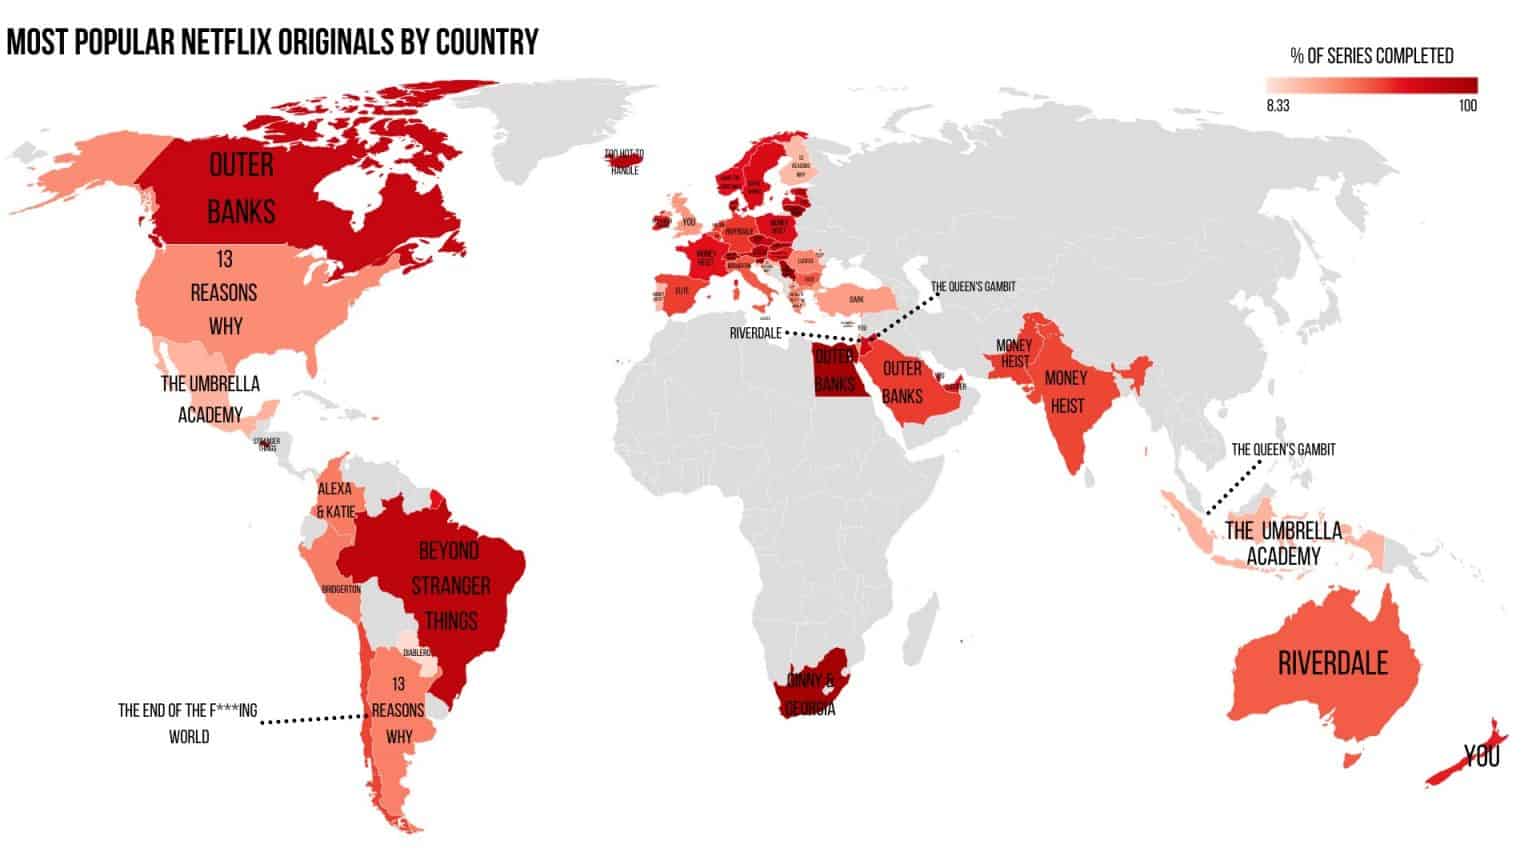 The most popular Netflix Original series by country - Comparitech